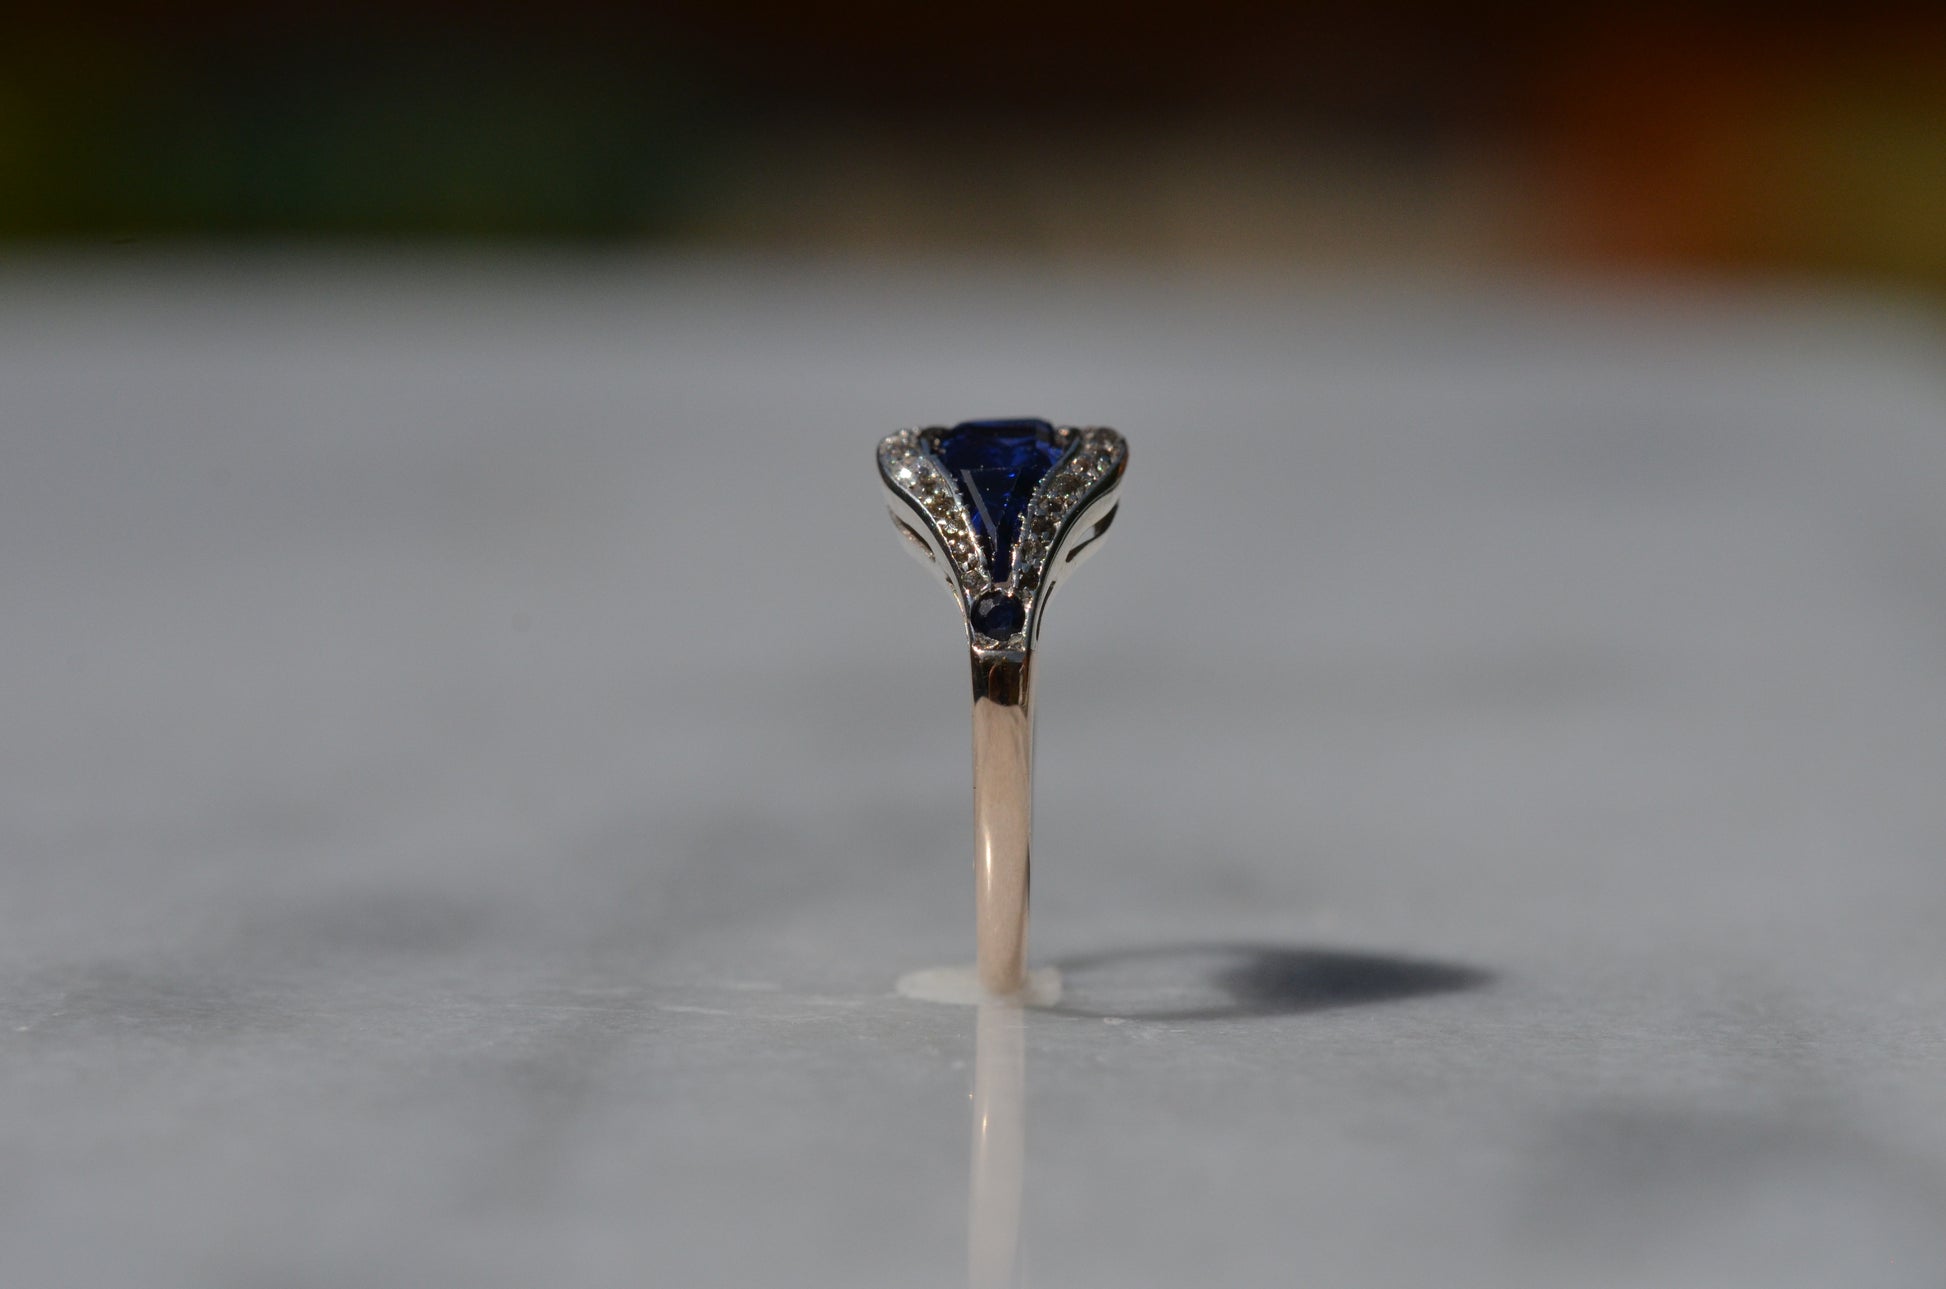 The ring is shown positioned upright viewed from the side to focus on the profile.